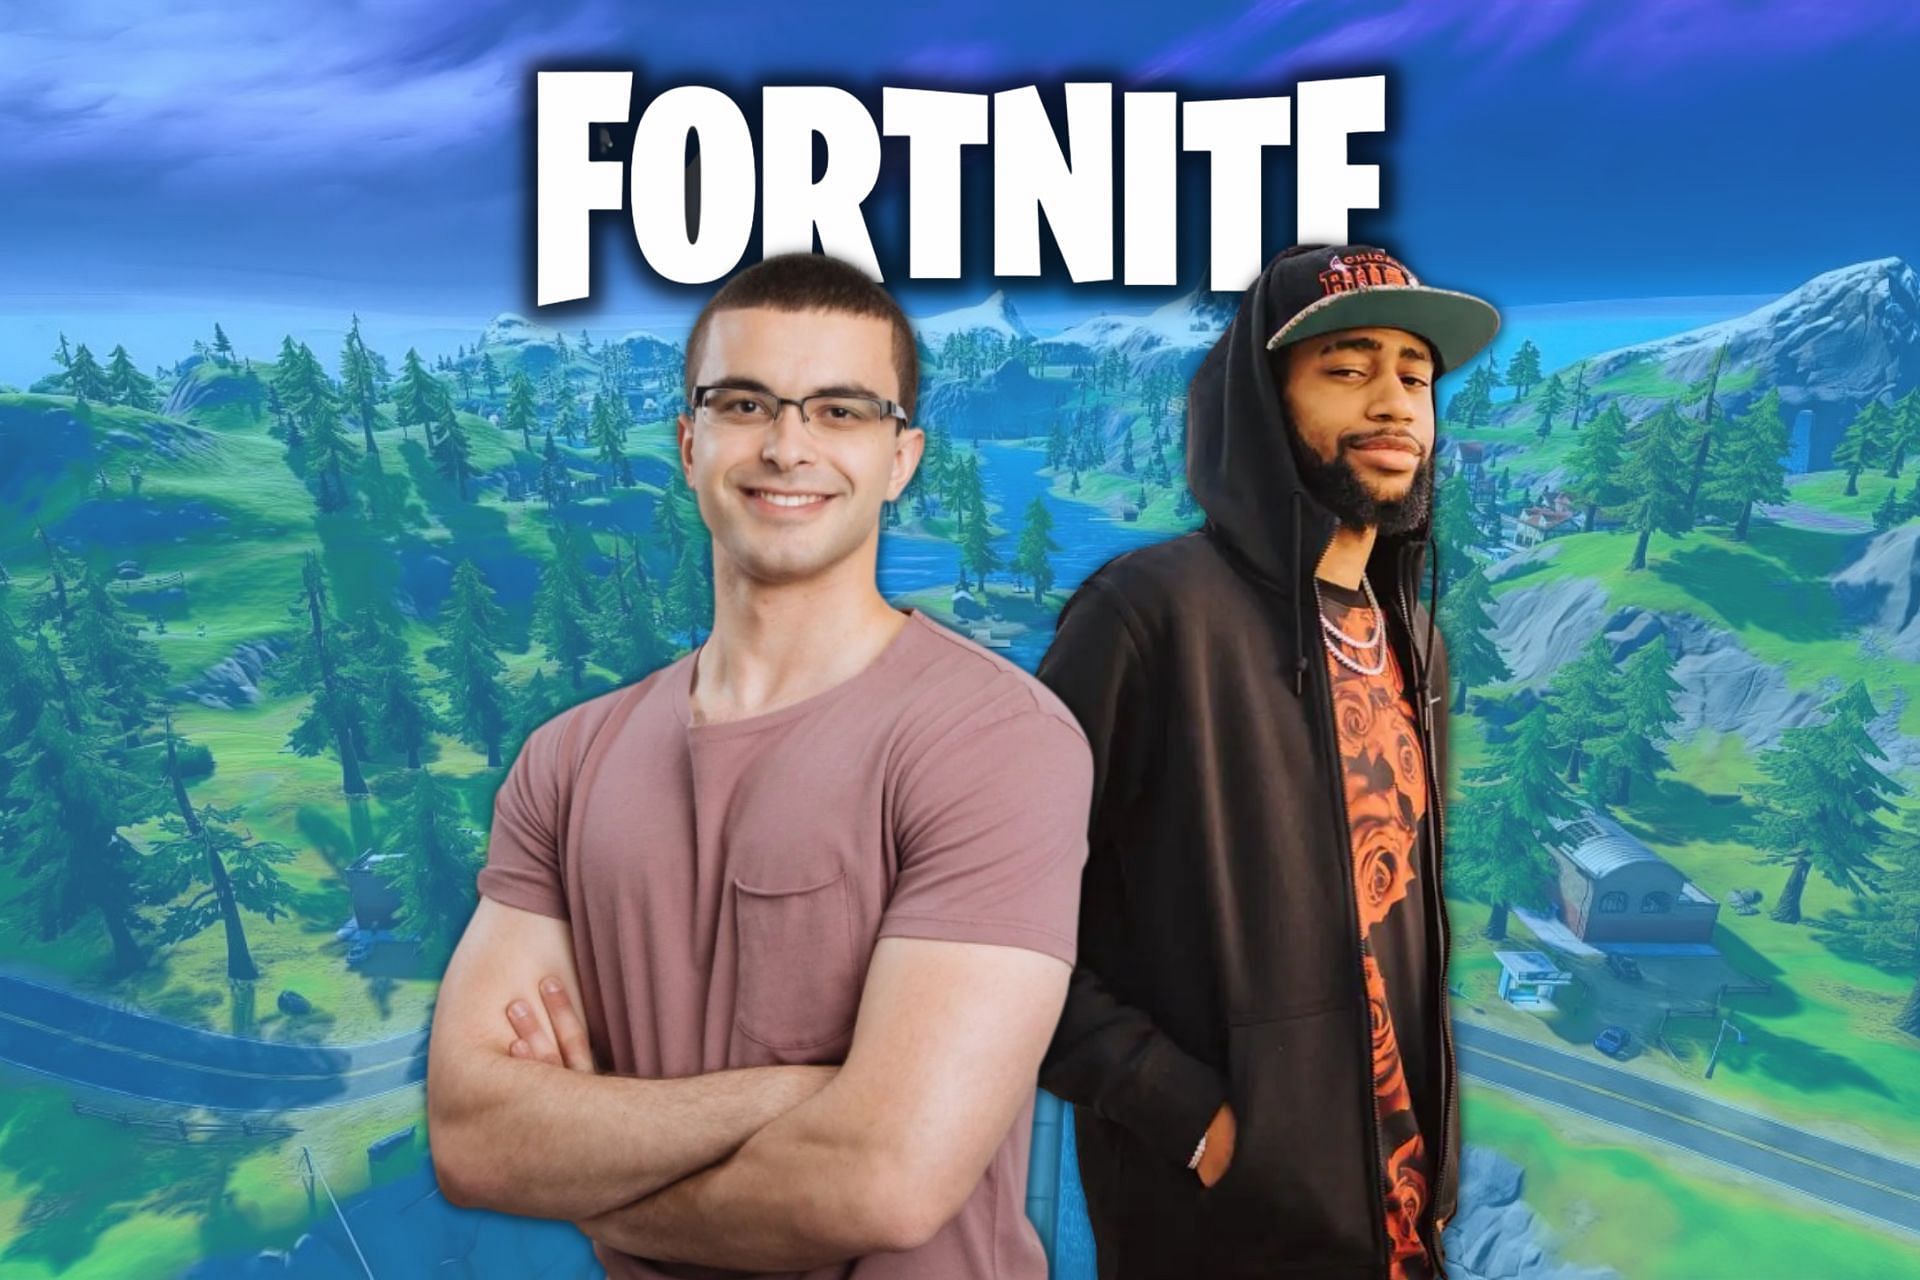 These Fortnite players are living legends within the community (Image via Sportskeeda)